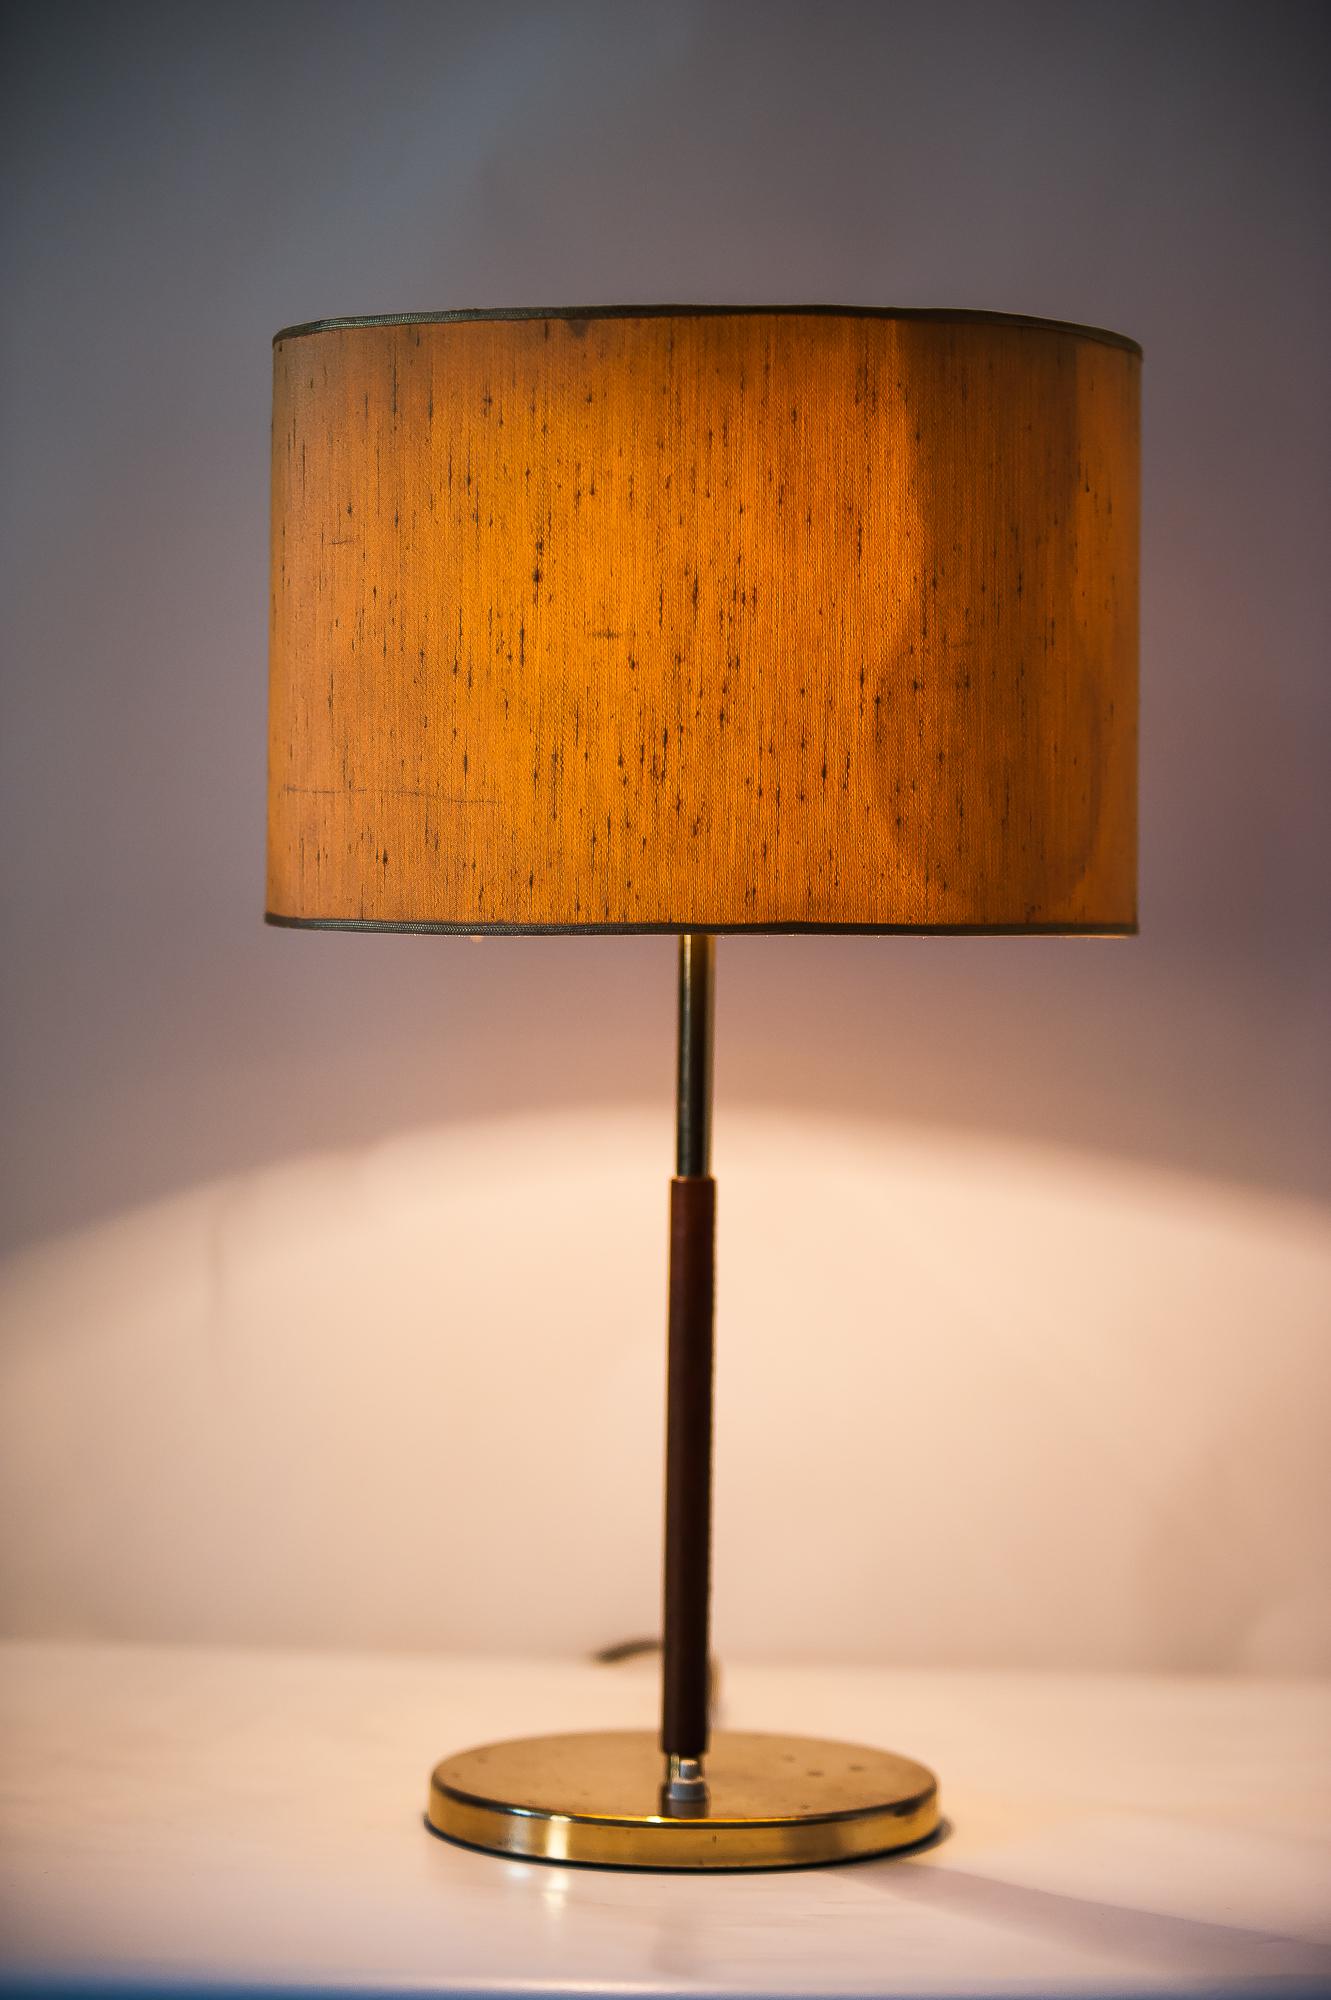 Austrian Kalmar Table Lamps with Leather Covered Stem and Yellow Shade, Austria, 1950s